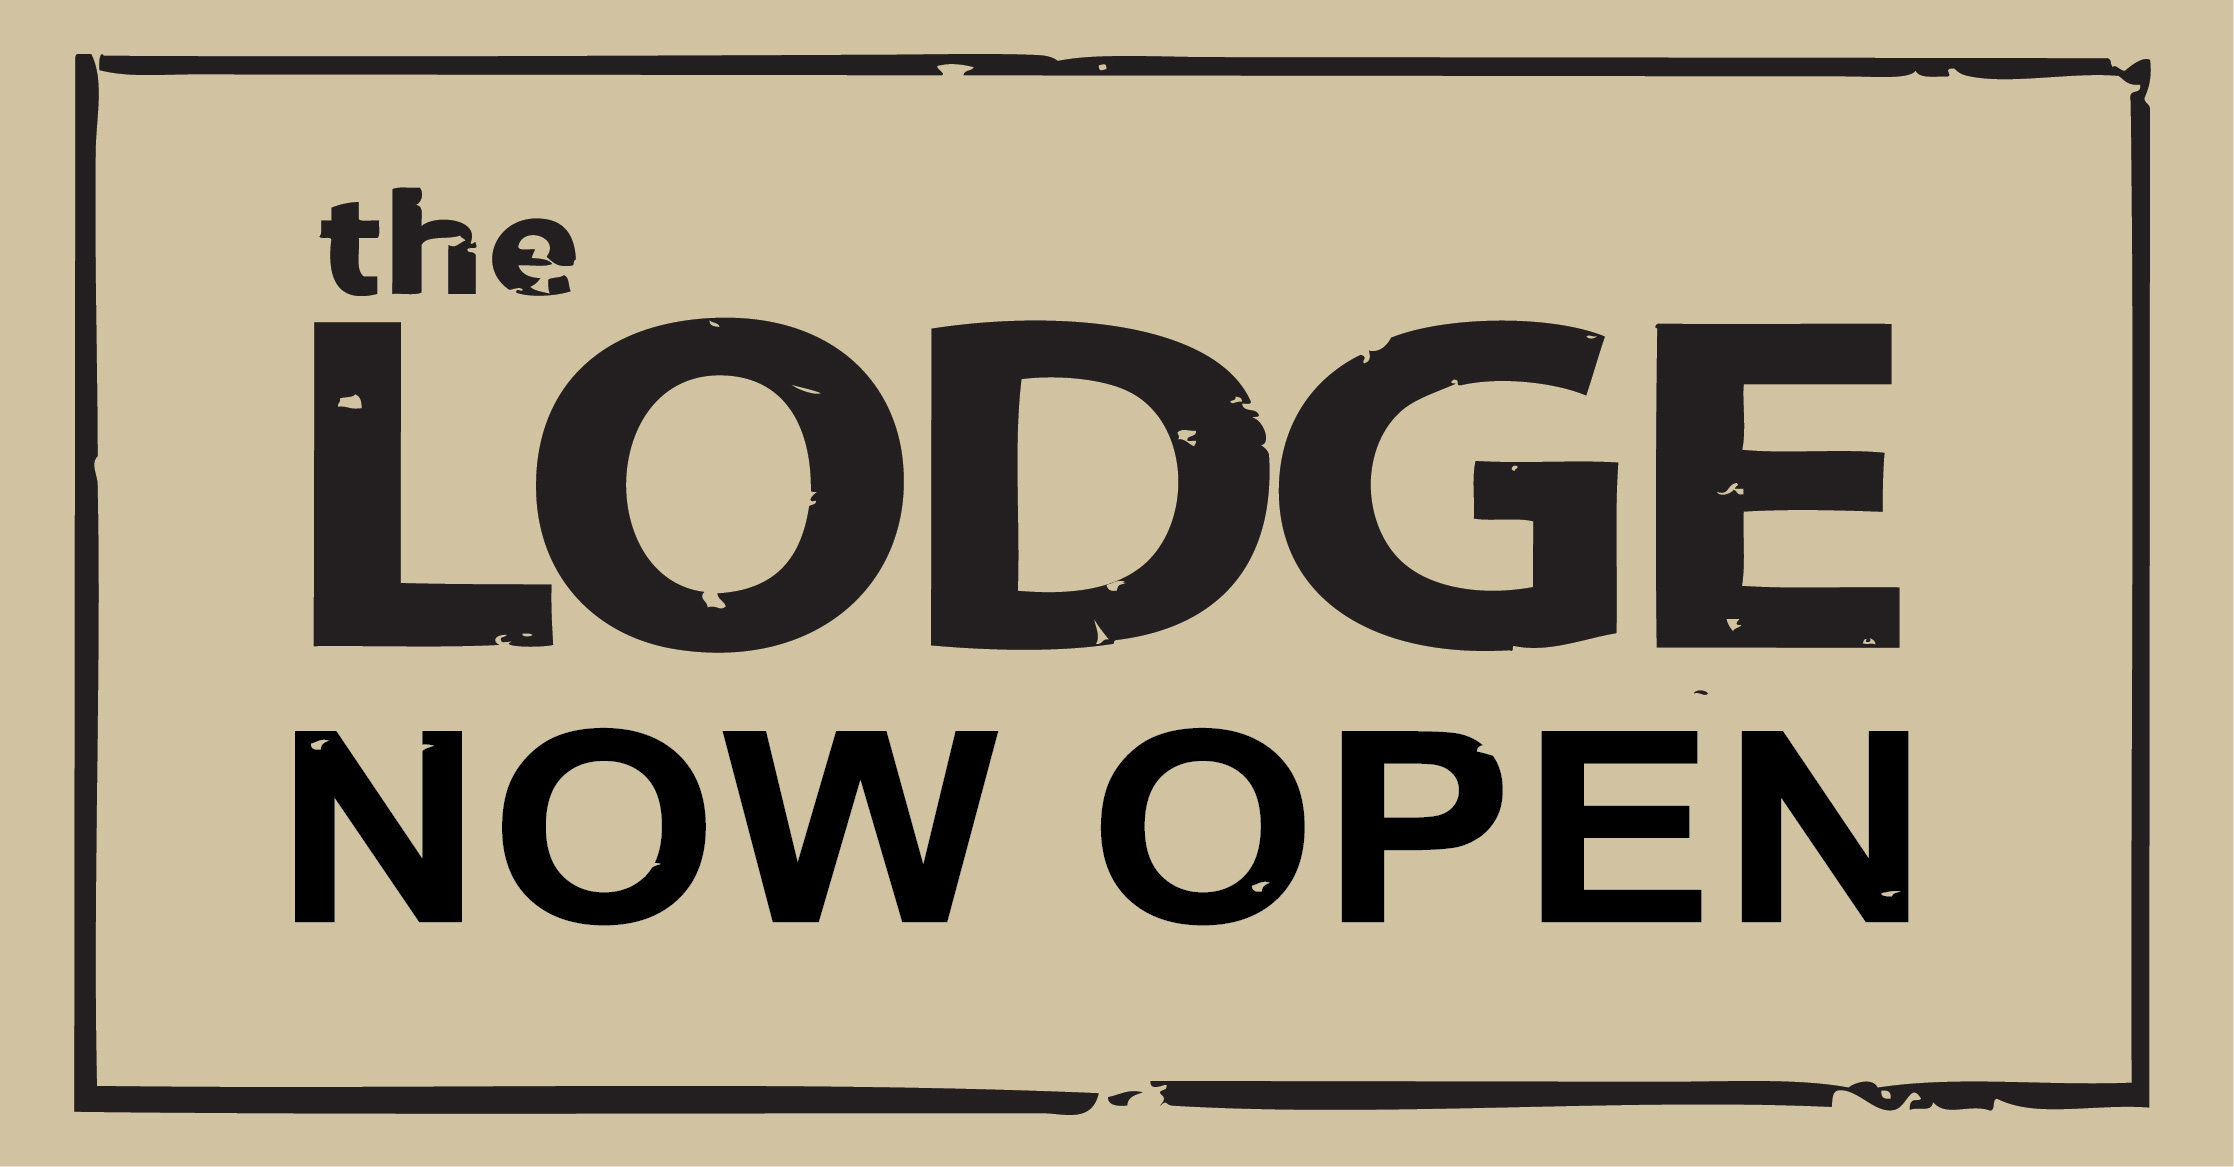 THE LODGE NOW OPEN